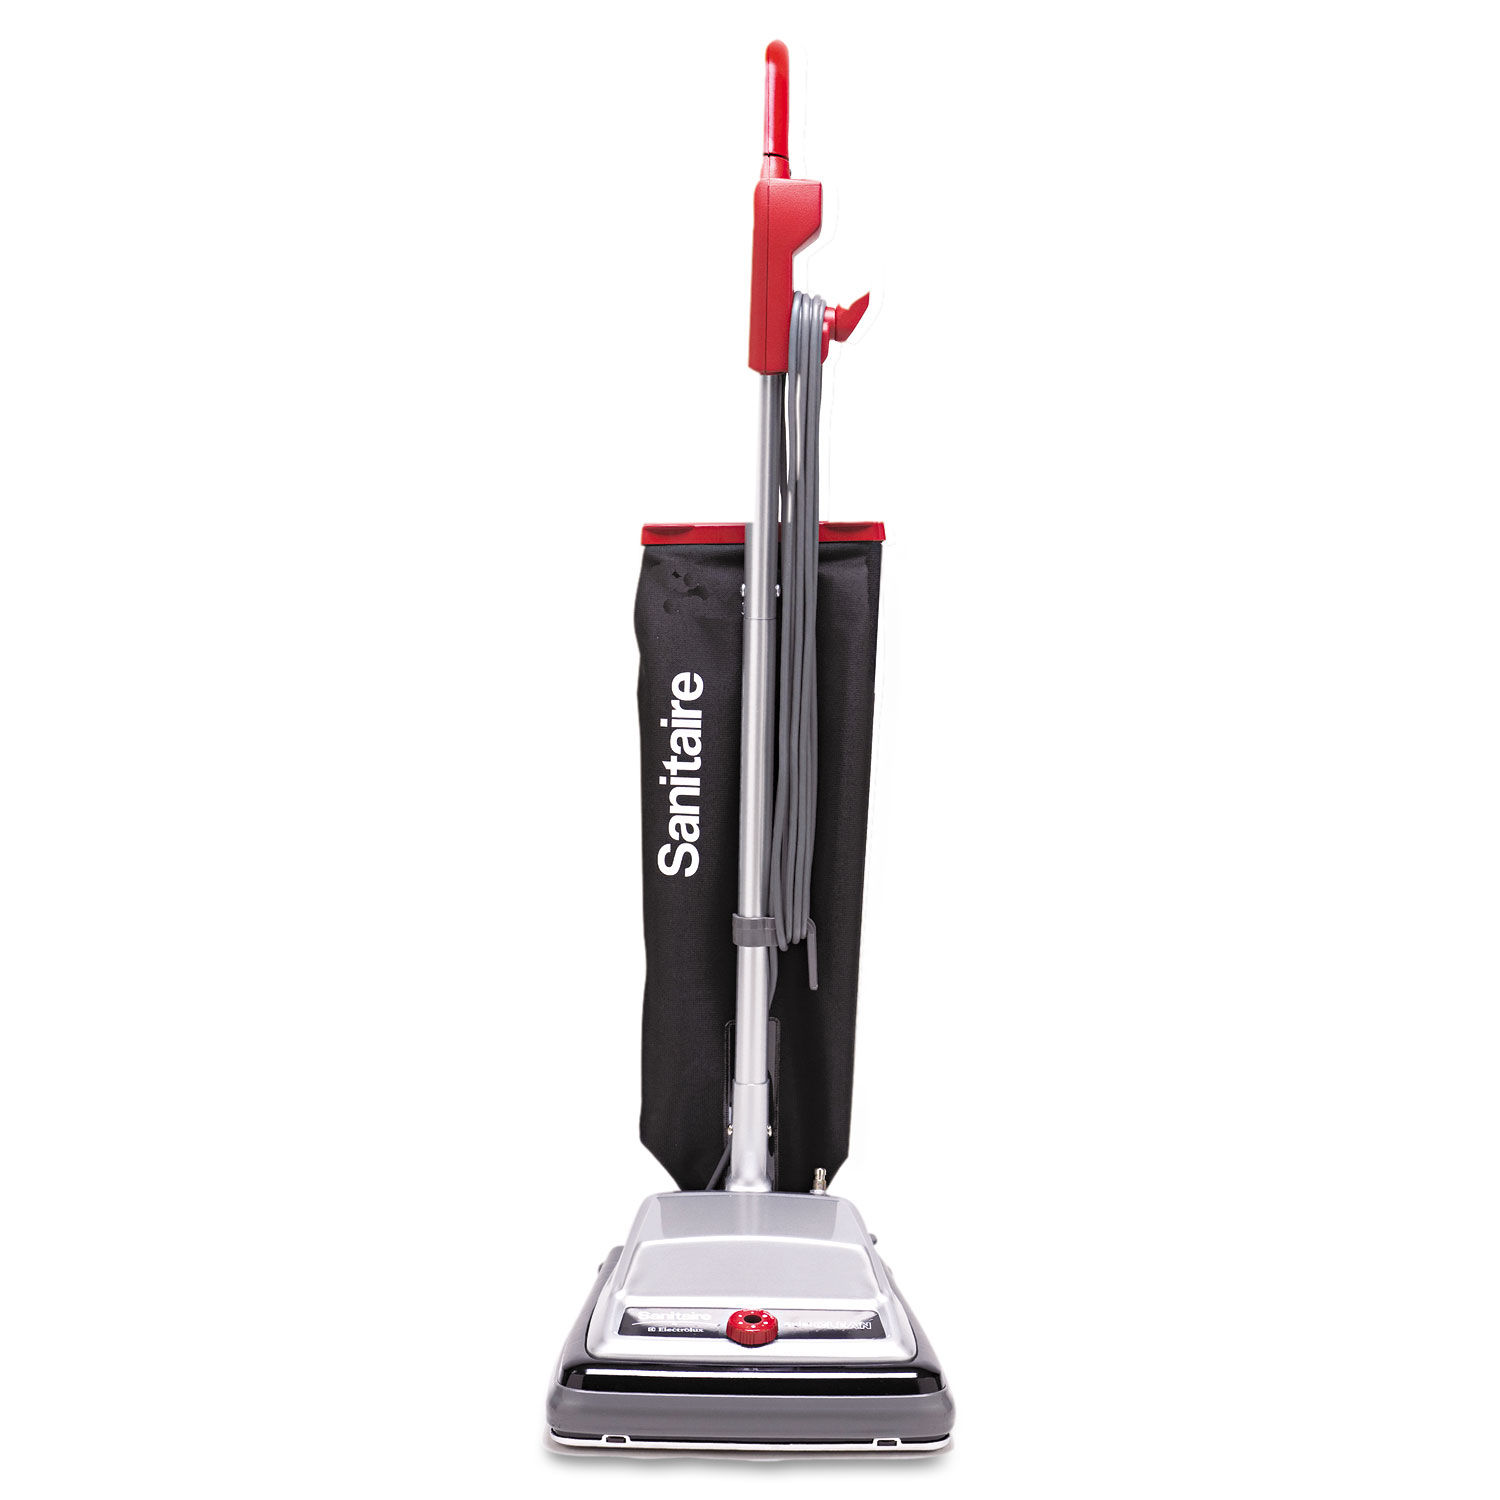 TRADITION QuietClean Upright Vacuum SC889A 12" Cleaning Path, Gray/Red/Black